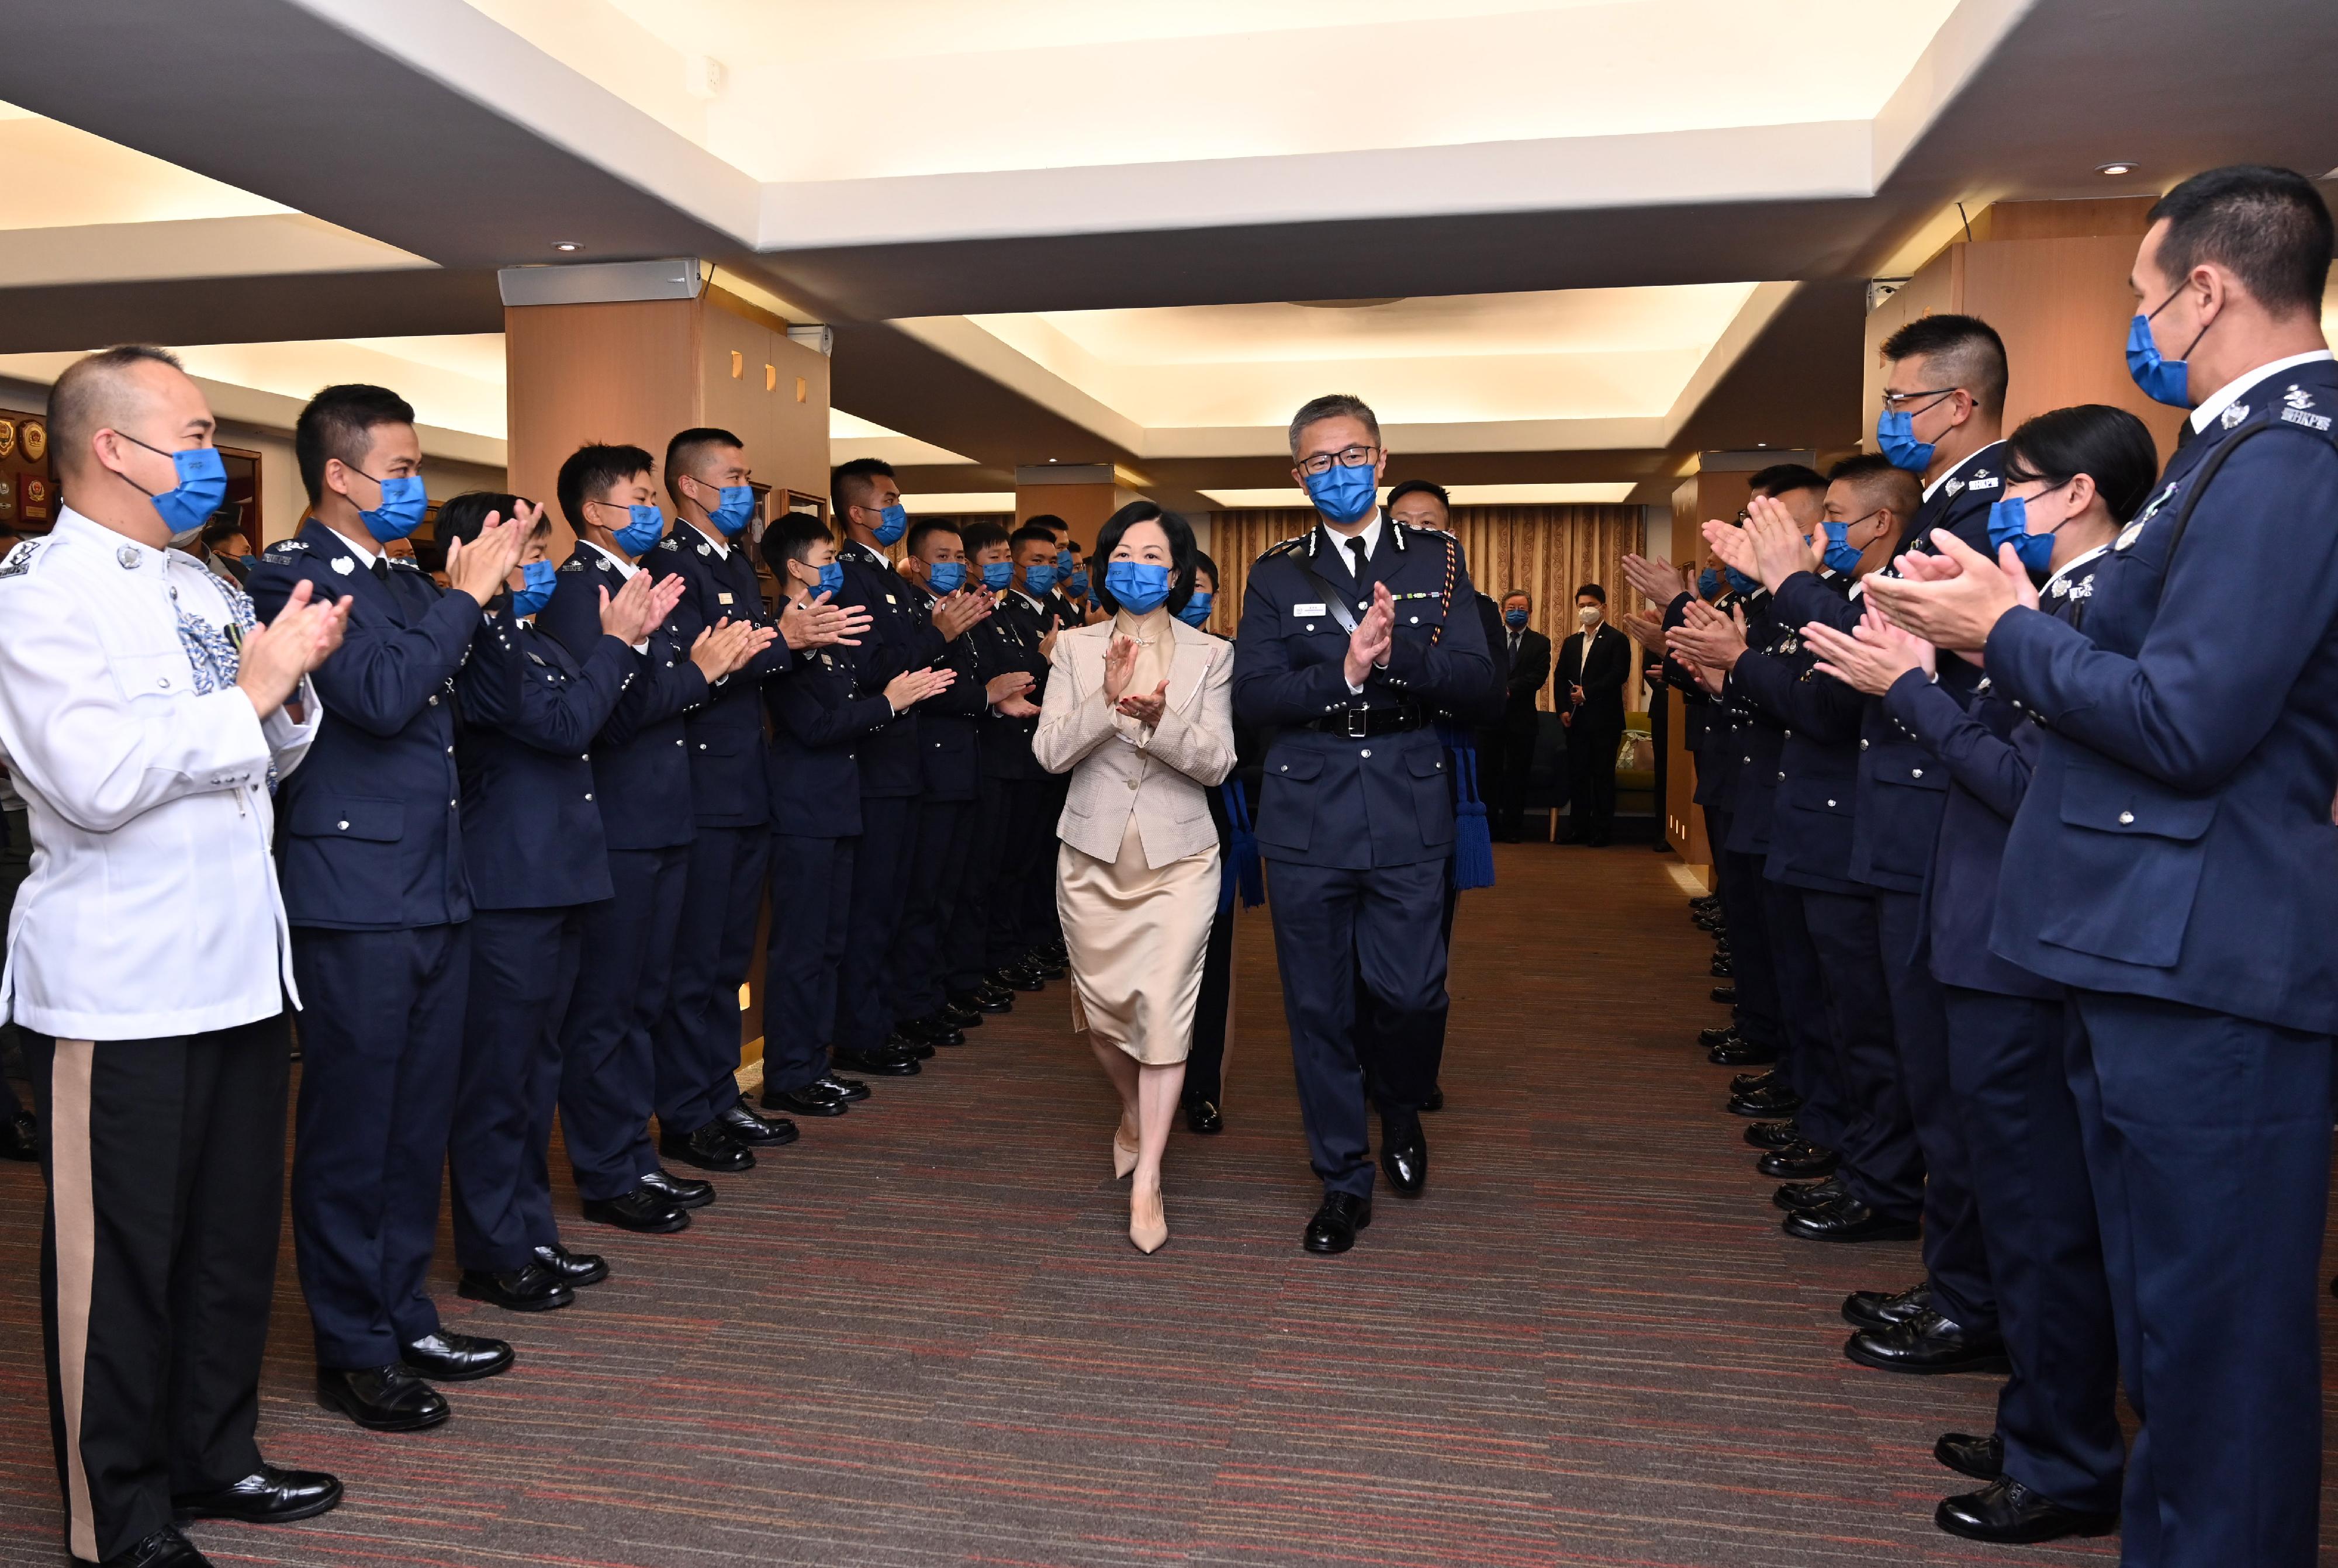 The Convenor of the Non-official Members of the Executive Council, Mrs Regina Ip, and the Commissioner of Police, Mr Siu Chak-yee, congratulate probationary inspectors after the passing-out parade held at the Hong Kong Police College today (November 26).